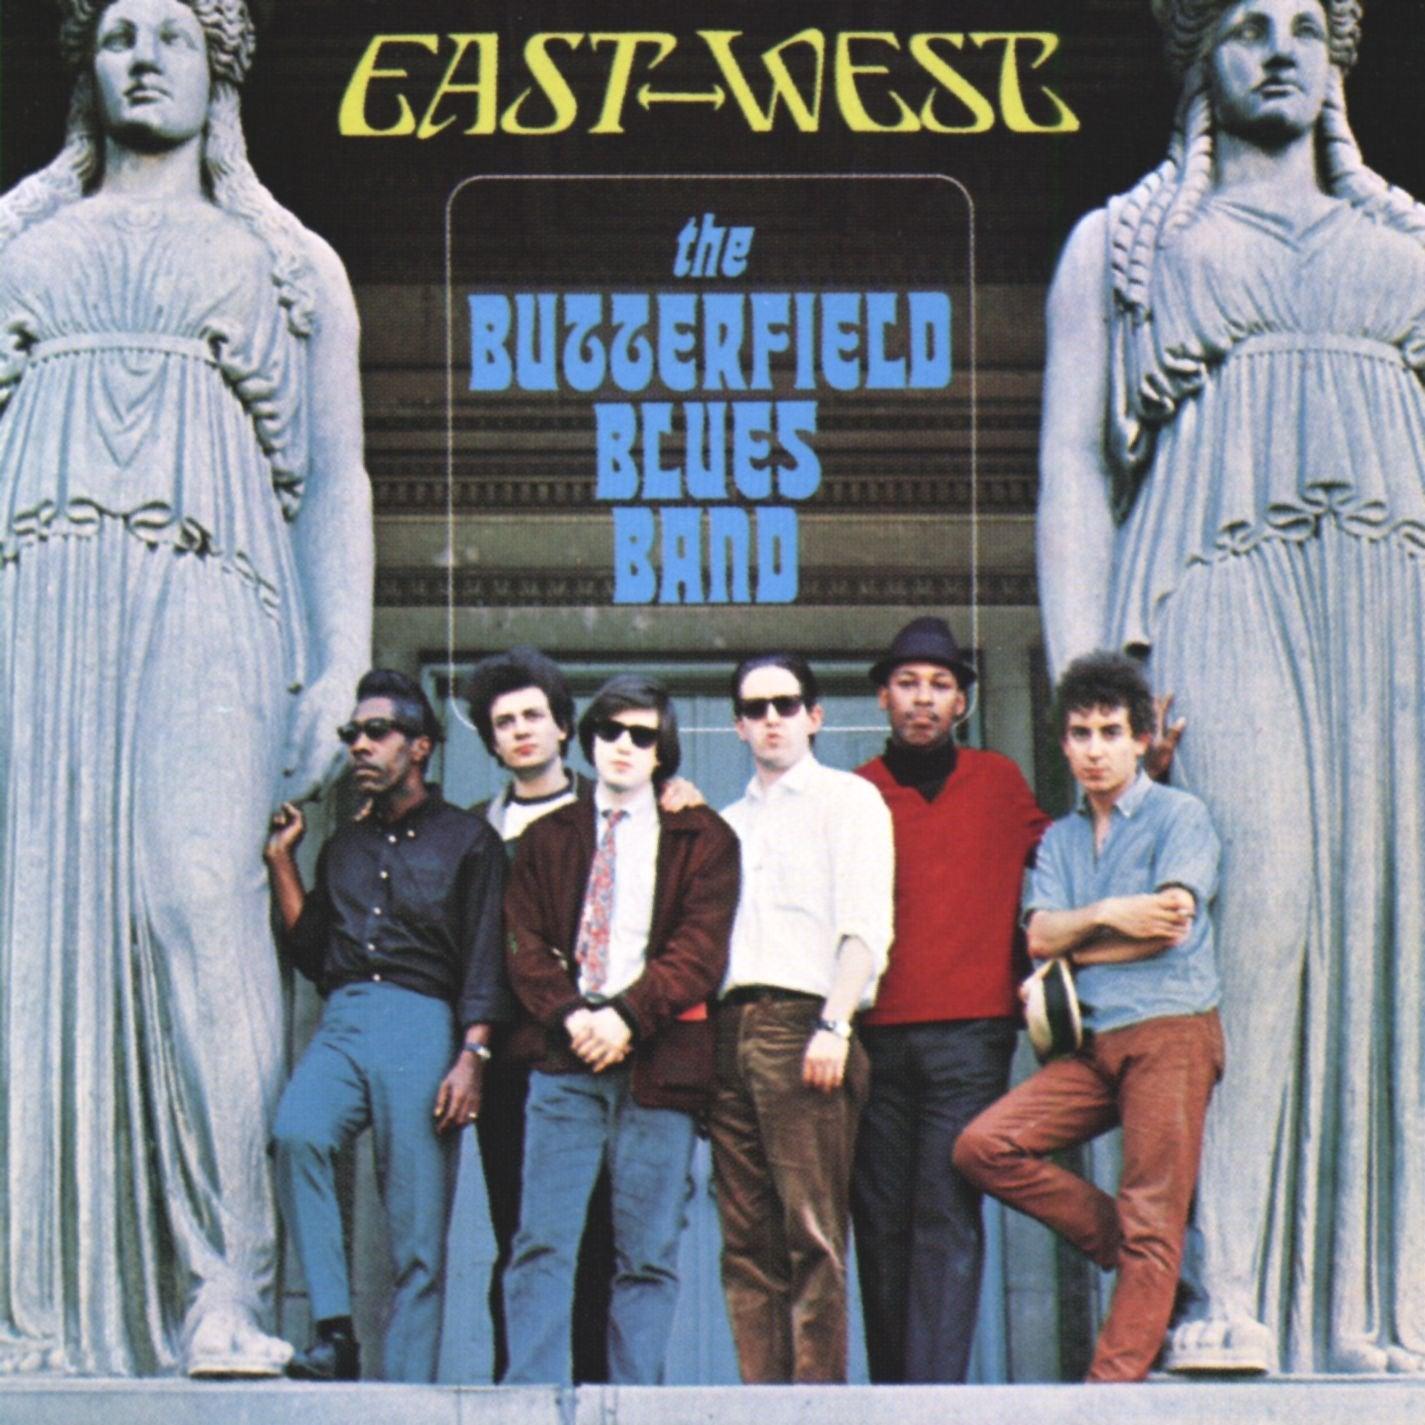 The Butterfield Blues Band- East-West - Darkside Records